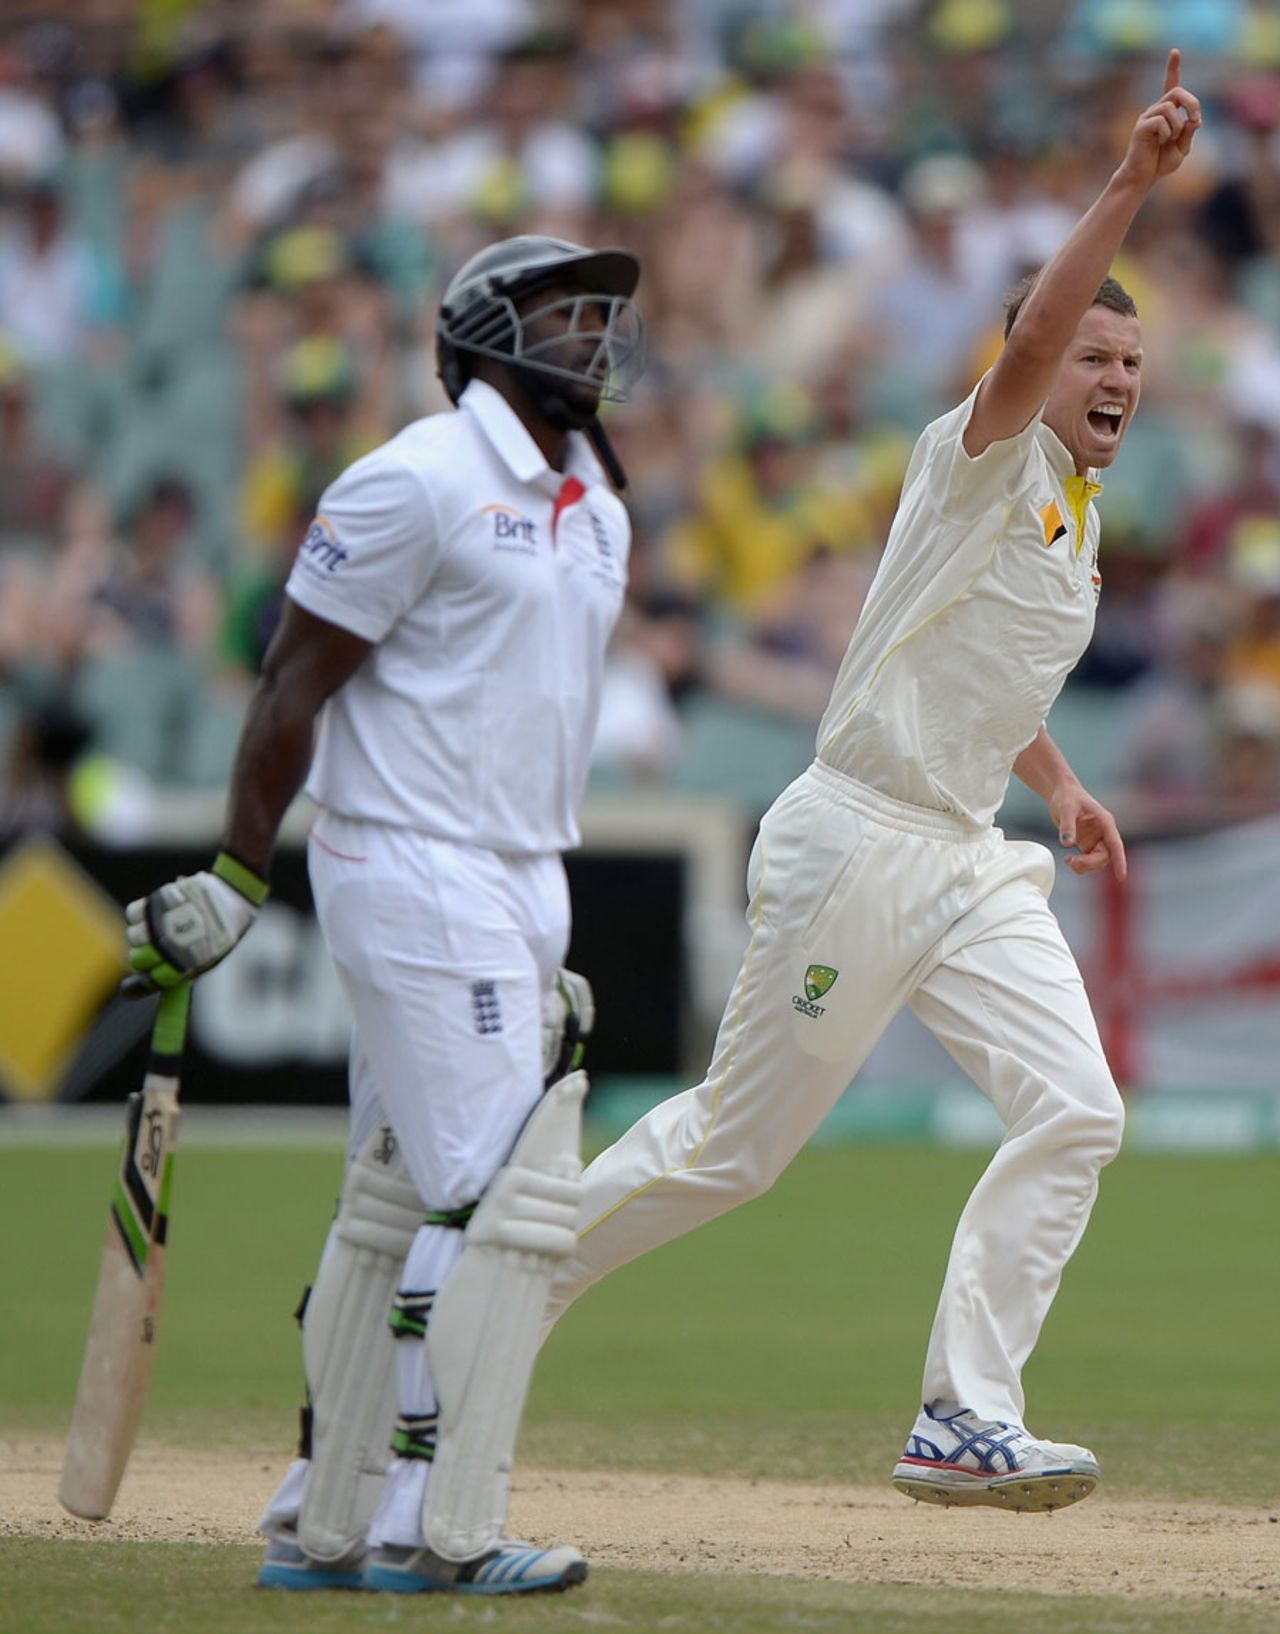 Peter Siddle had Michael Carberry caught at long leg, Australia v England, 2nd Test, Adelaide, 4th day, December 8, 2013